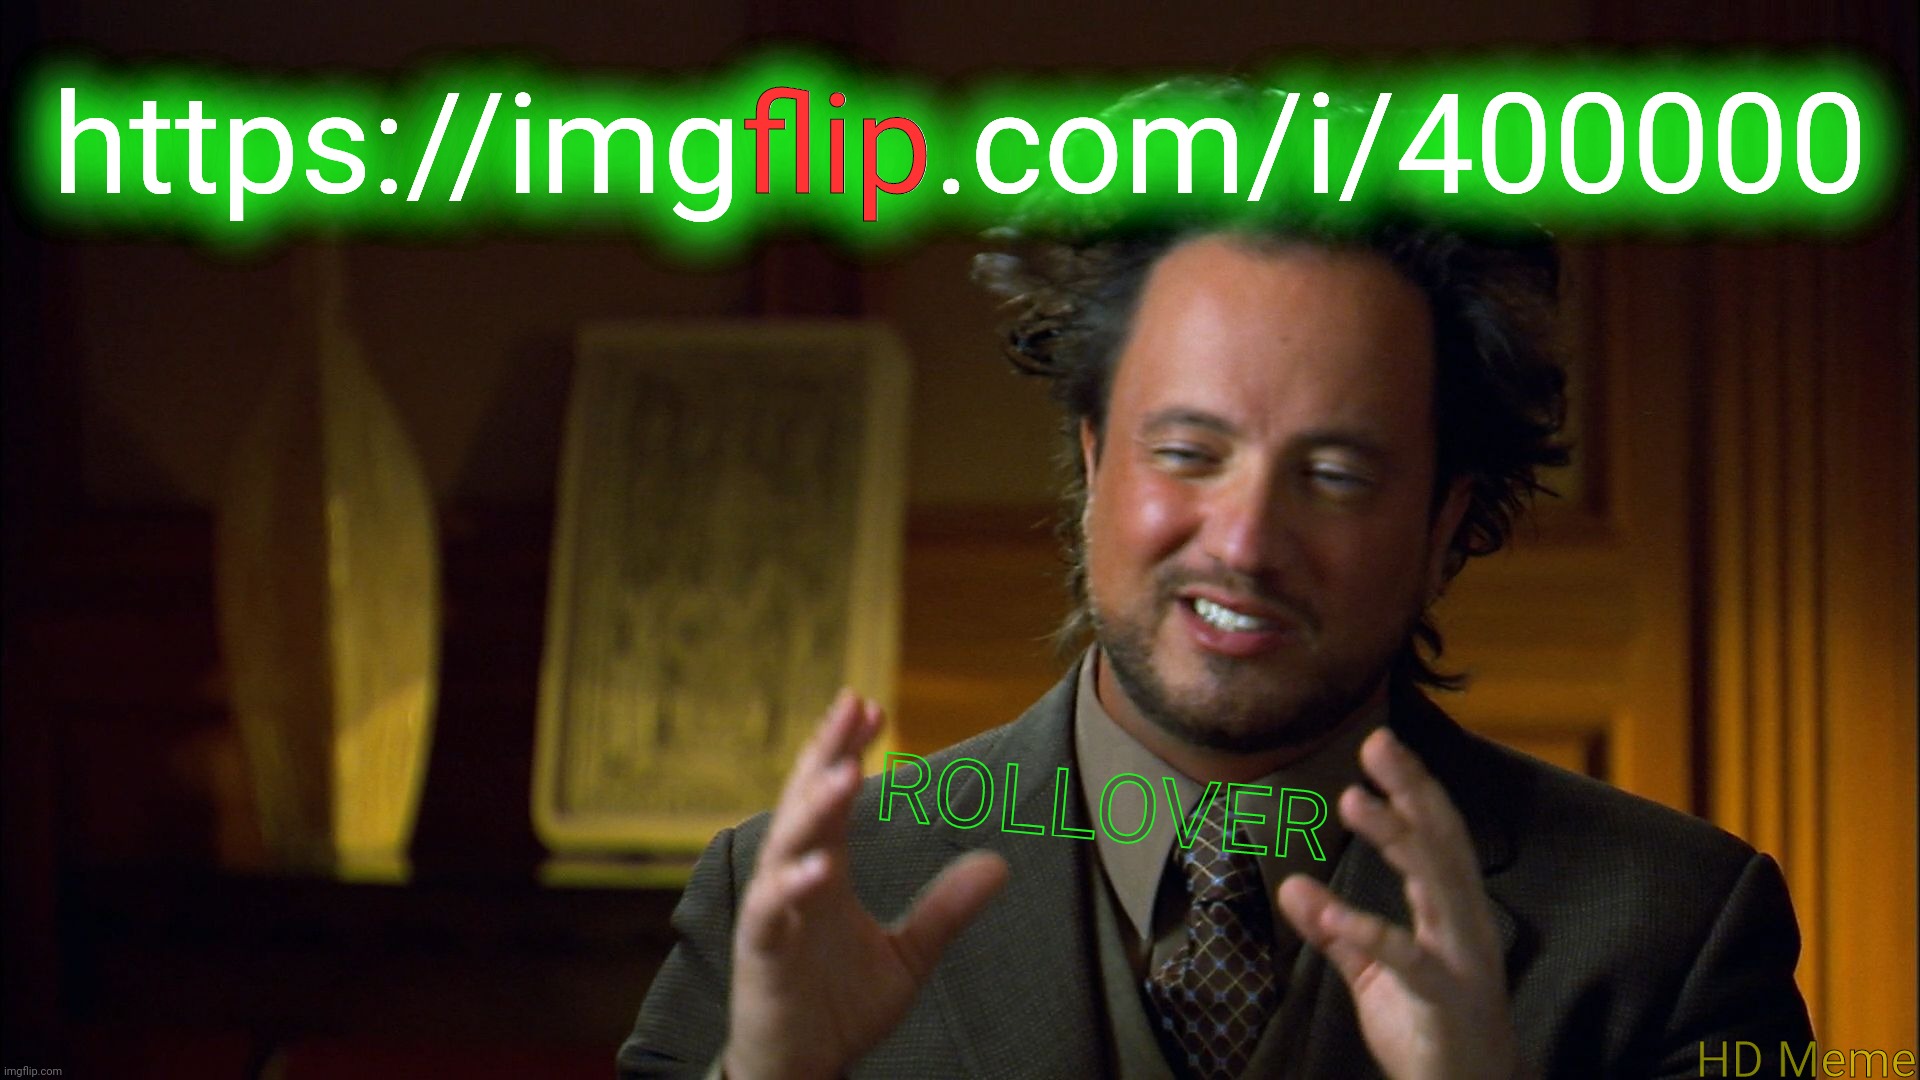 ancient aliens clowns | https://imgflip.com/i/400000; flip; ROLLOVER; HD Meme | image tagged in ancient aliens clowns | made w/ Imgflip meme maker